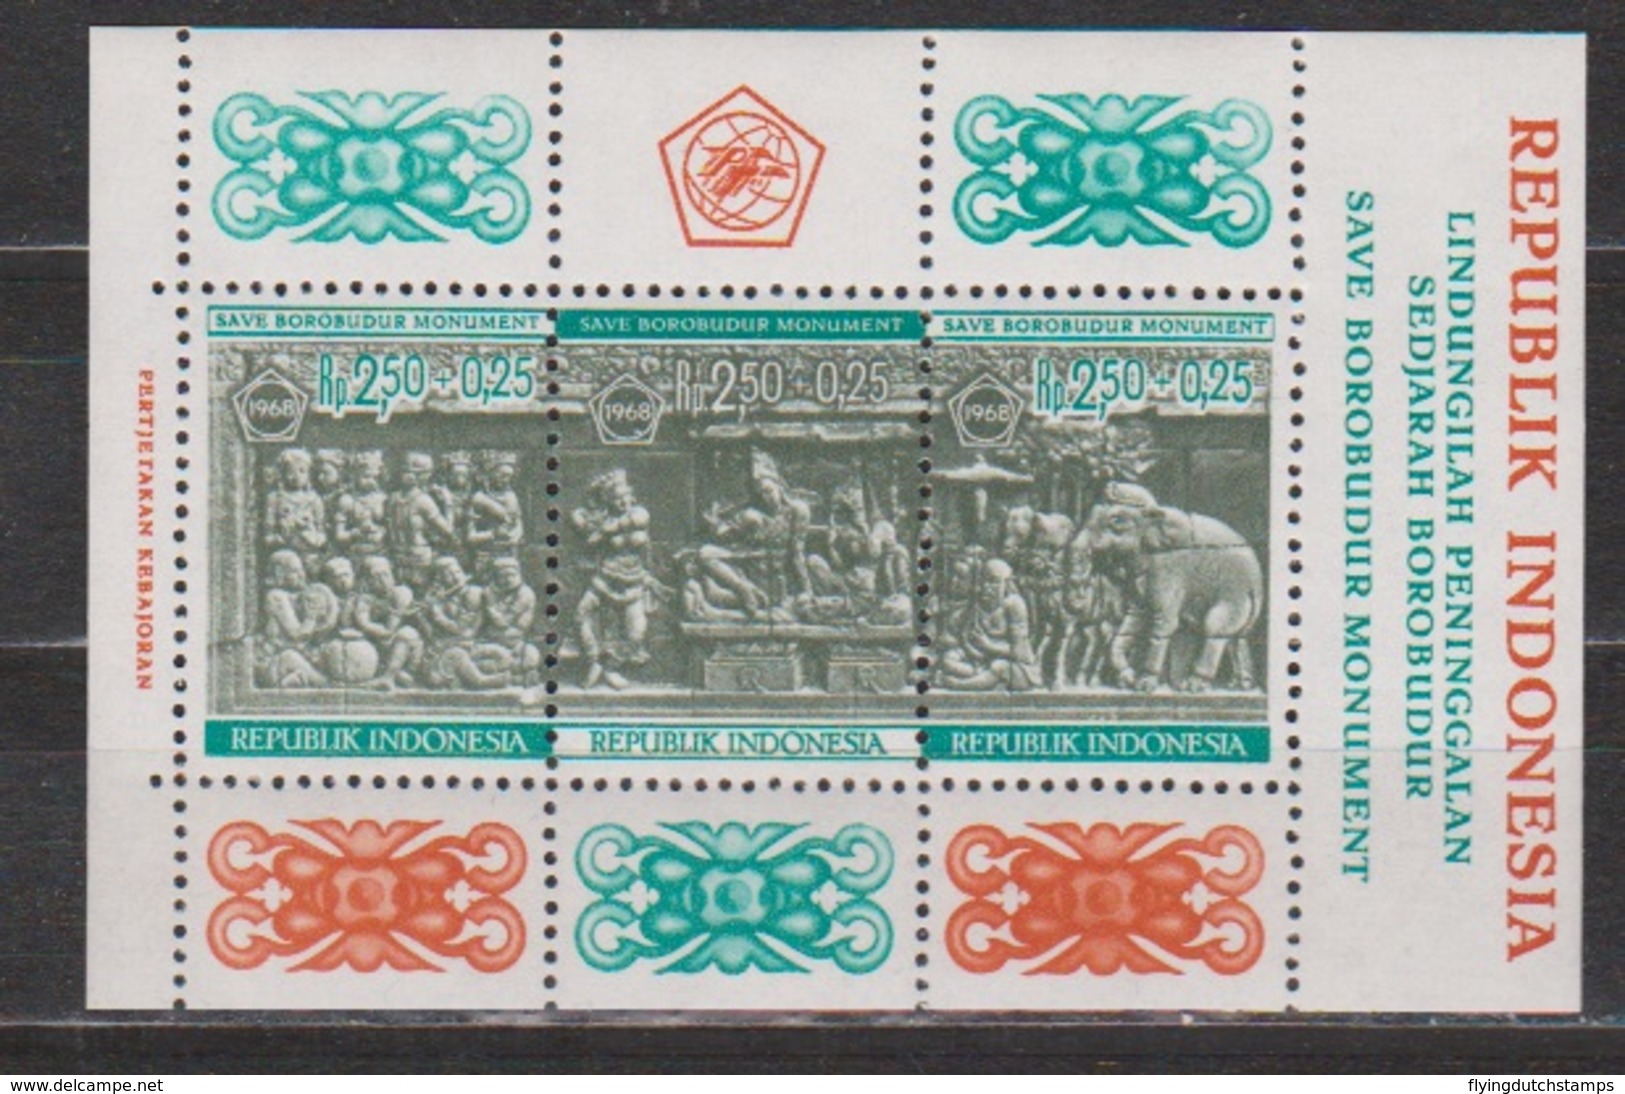 Indonesia Indonesie Blok Sheet 605 MNH (B10) ; Borobudur Temple 1968 NOW MANY STAMPS INDONESIA VERY CHEAP - Monumenten